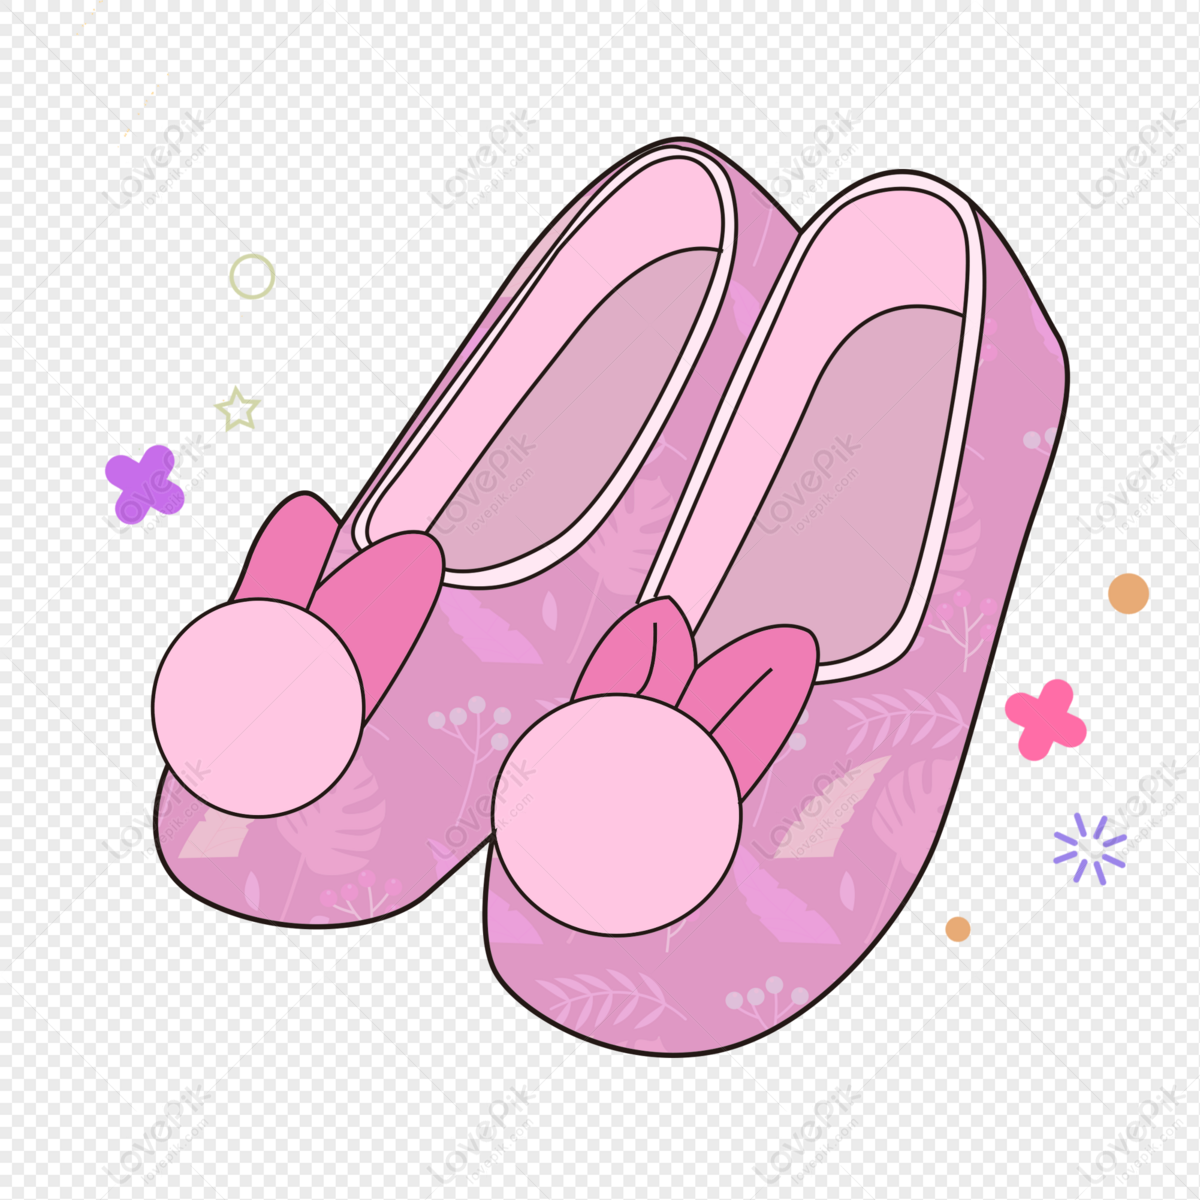 Cute Girl Shoes PNG Image Free Download And Clipart Image For Free Download  - Lovepik | 401126851